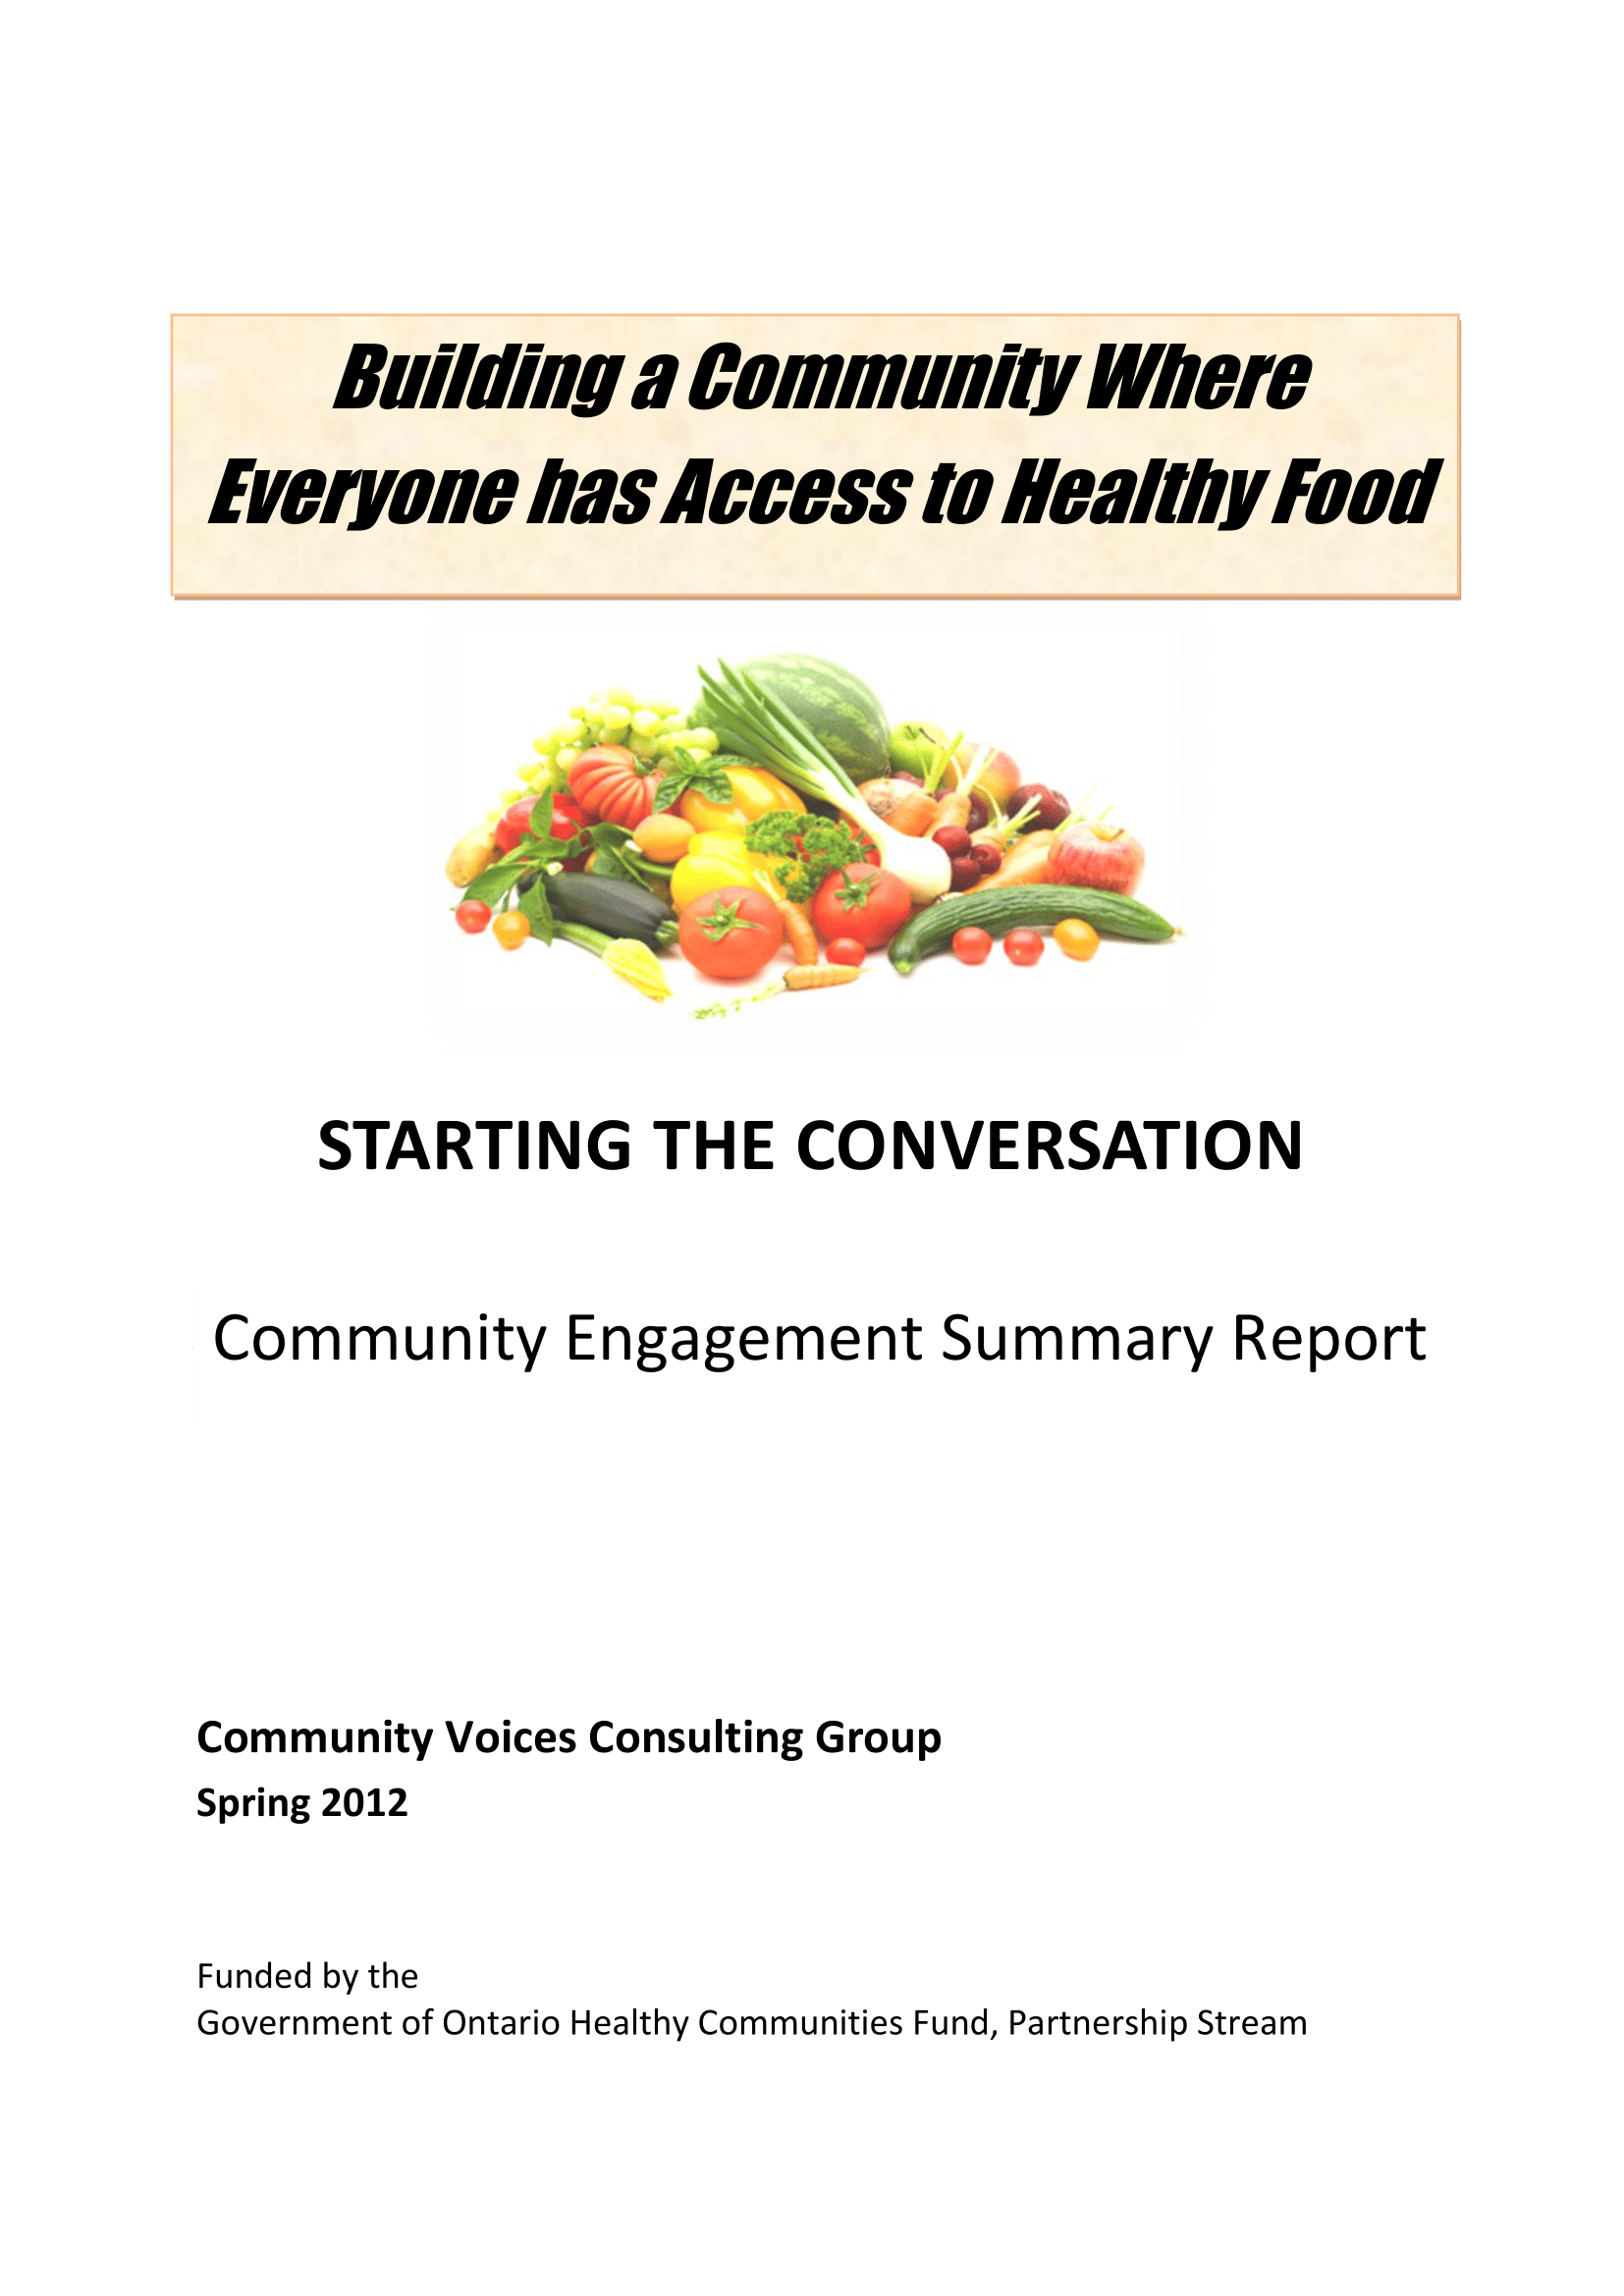 Read the PDF Report Food Security Rural Community Engagement Report